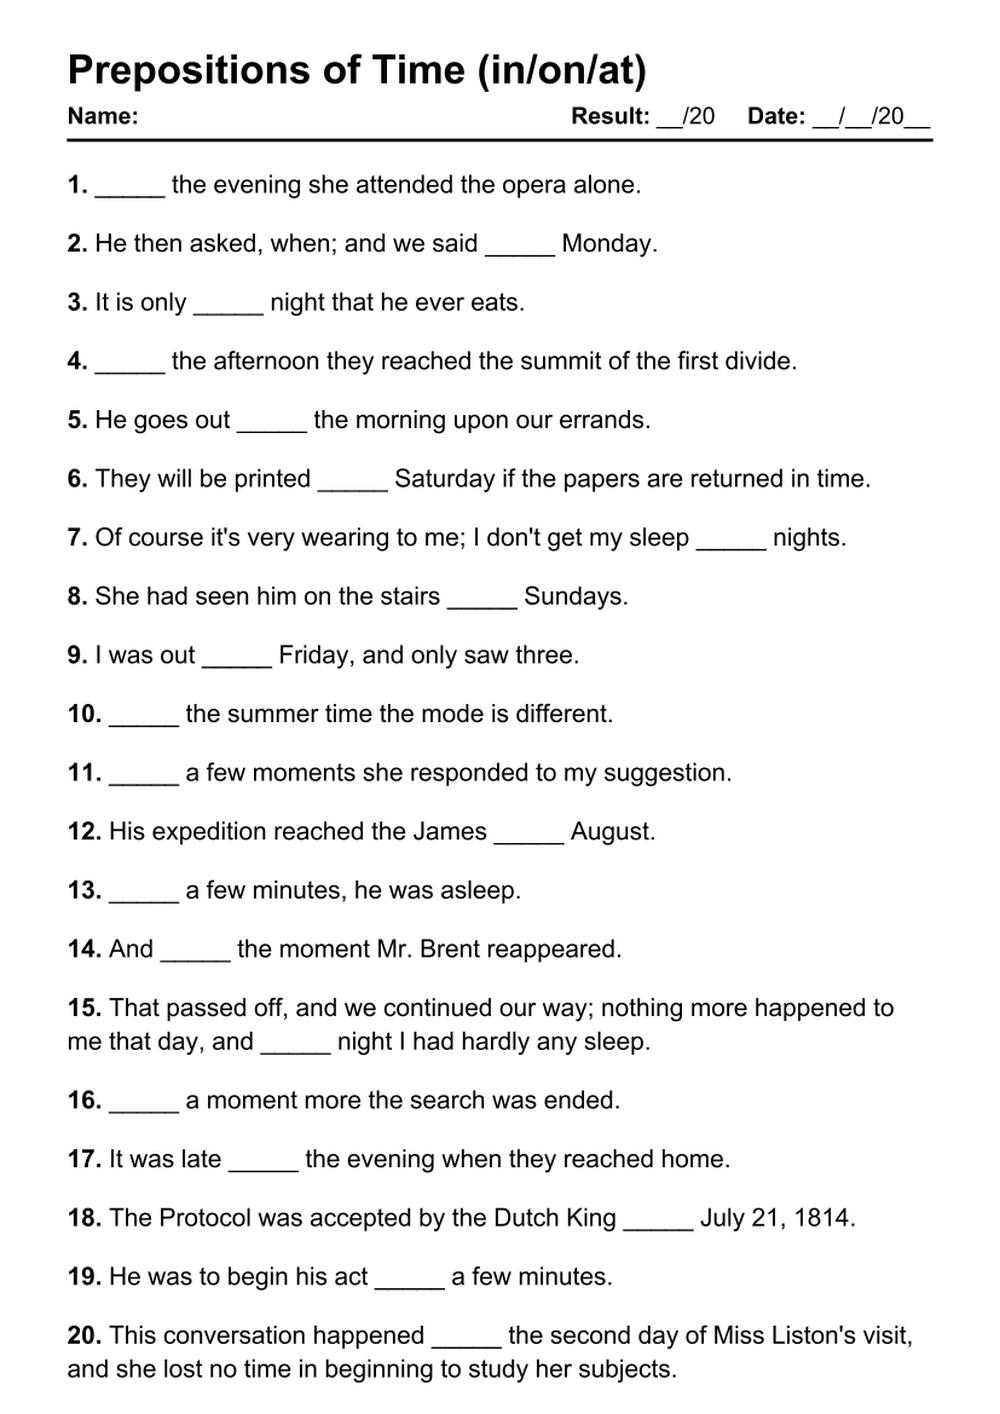 Printable Prepositions of Time Exercises - PDF Worksheet with Answers - Test 87